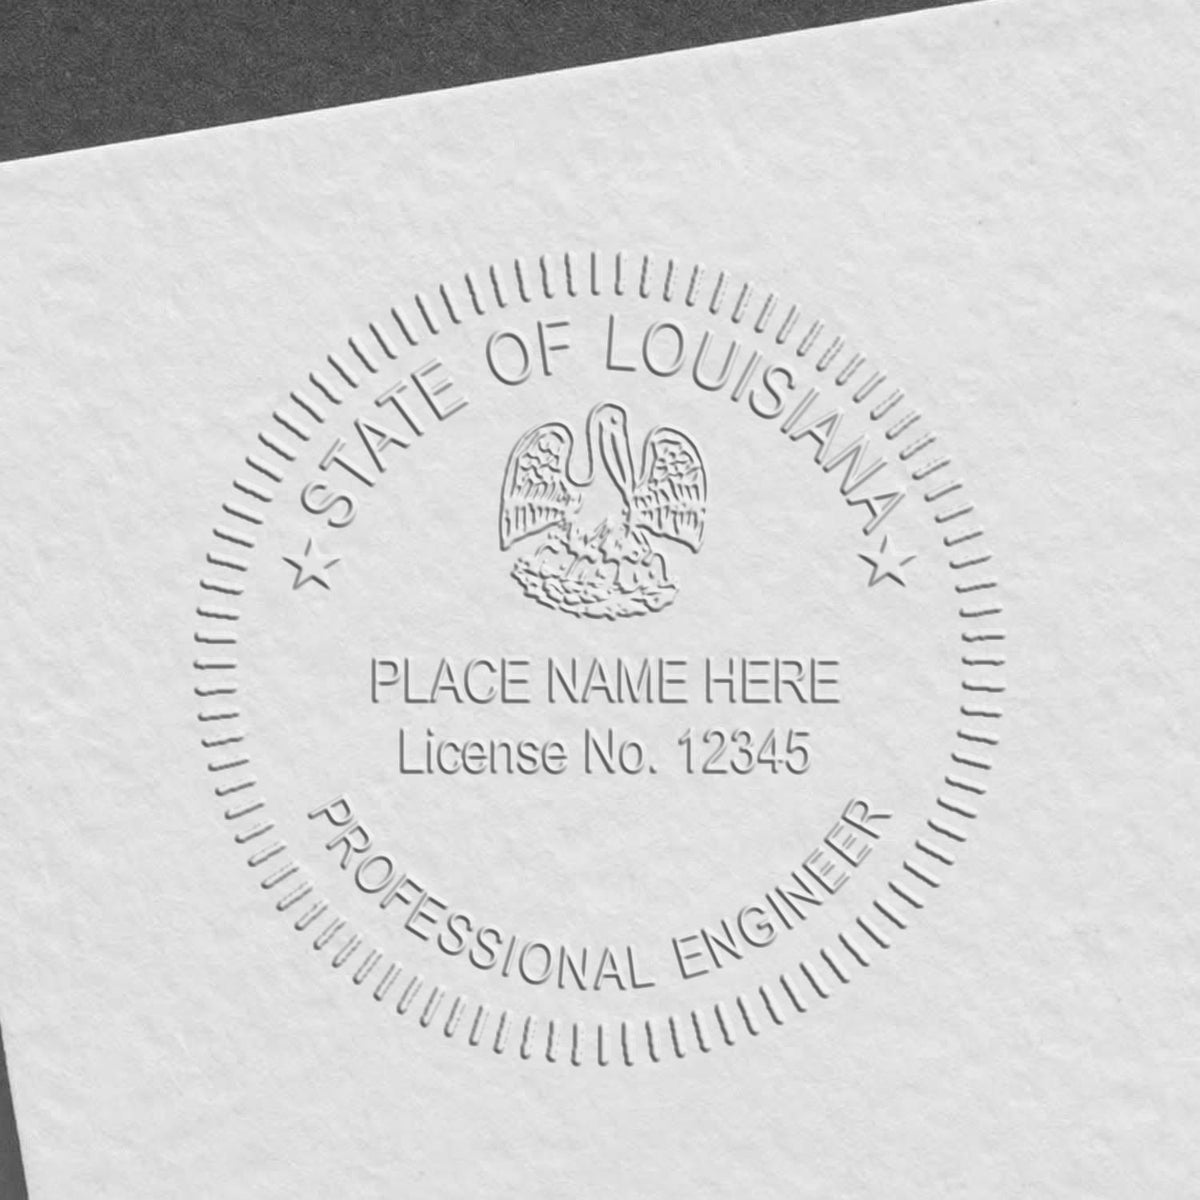 The Heavy Duty Cast Iron Louisiana Engineer Seal Embosser stamp impression comes to life with a crisp, detailed photo on paper - showcasing true professional quality.